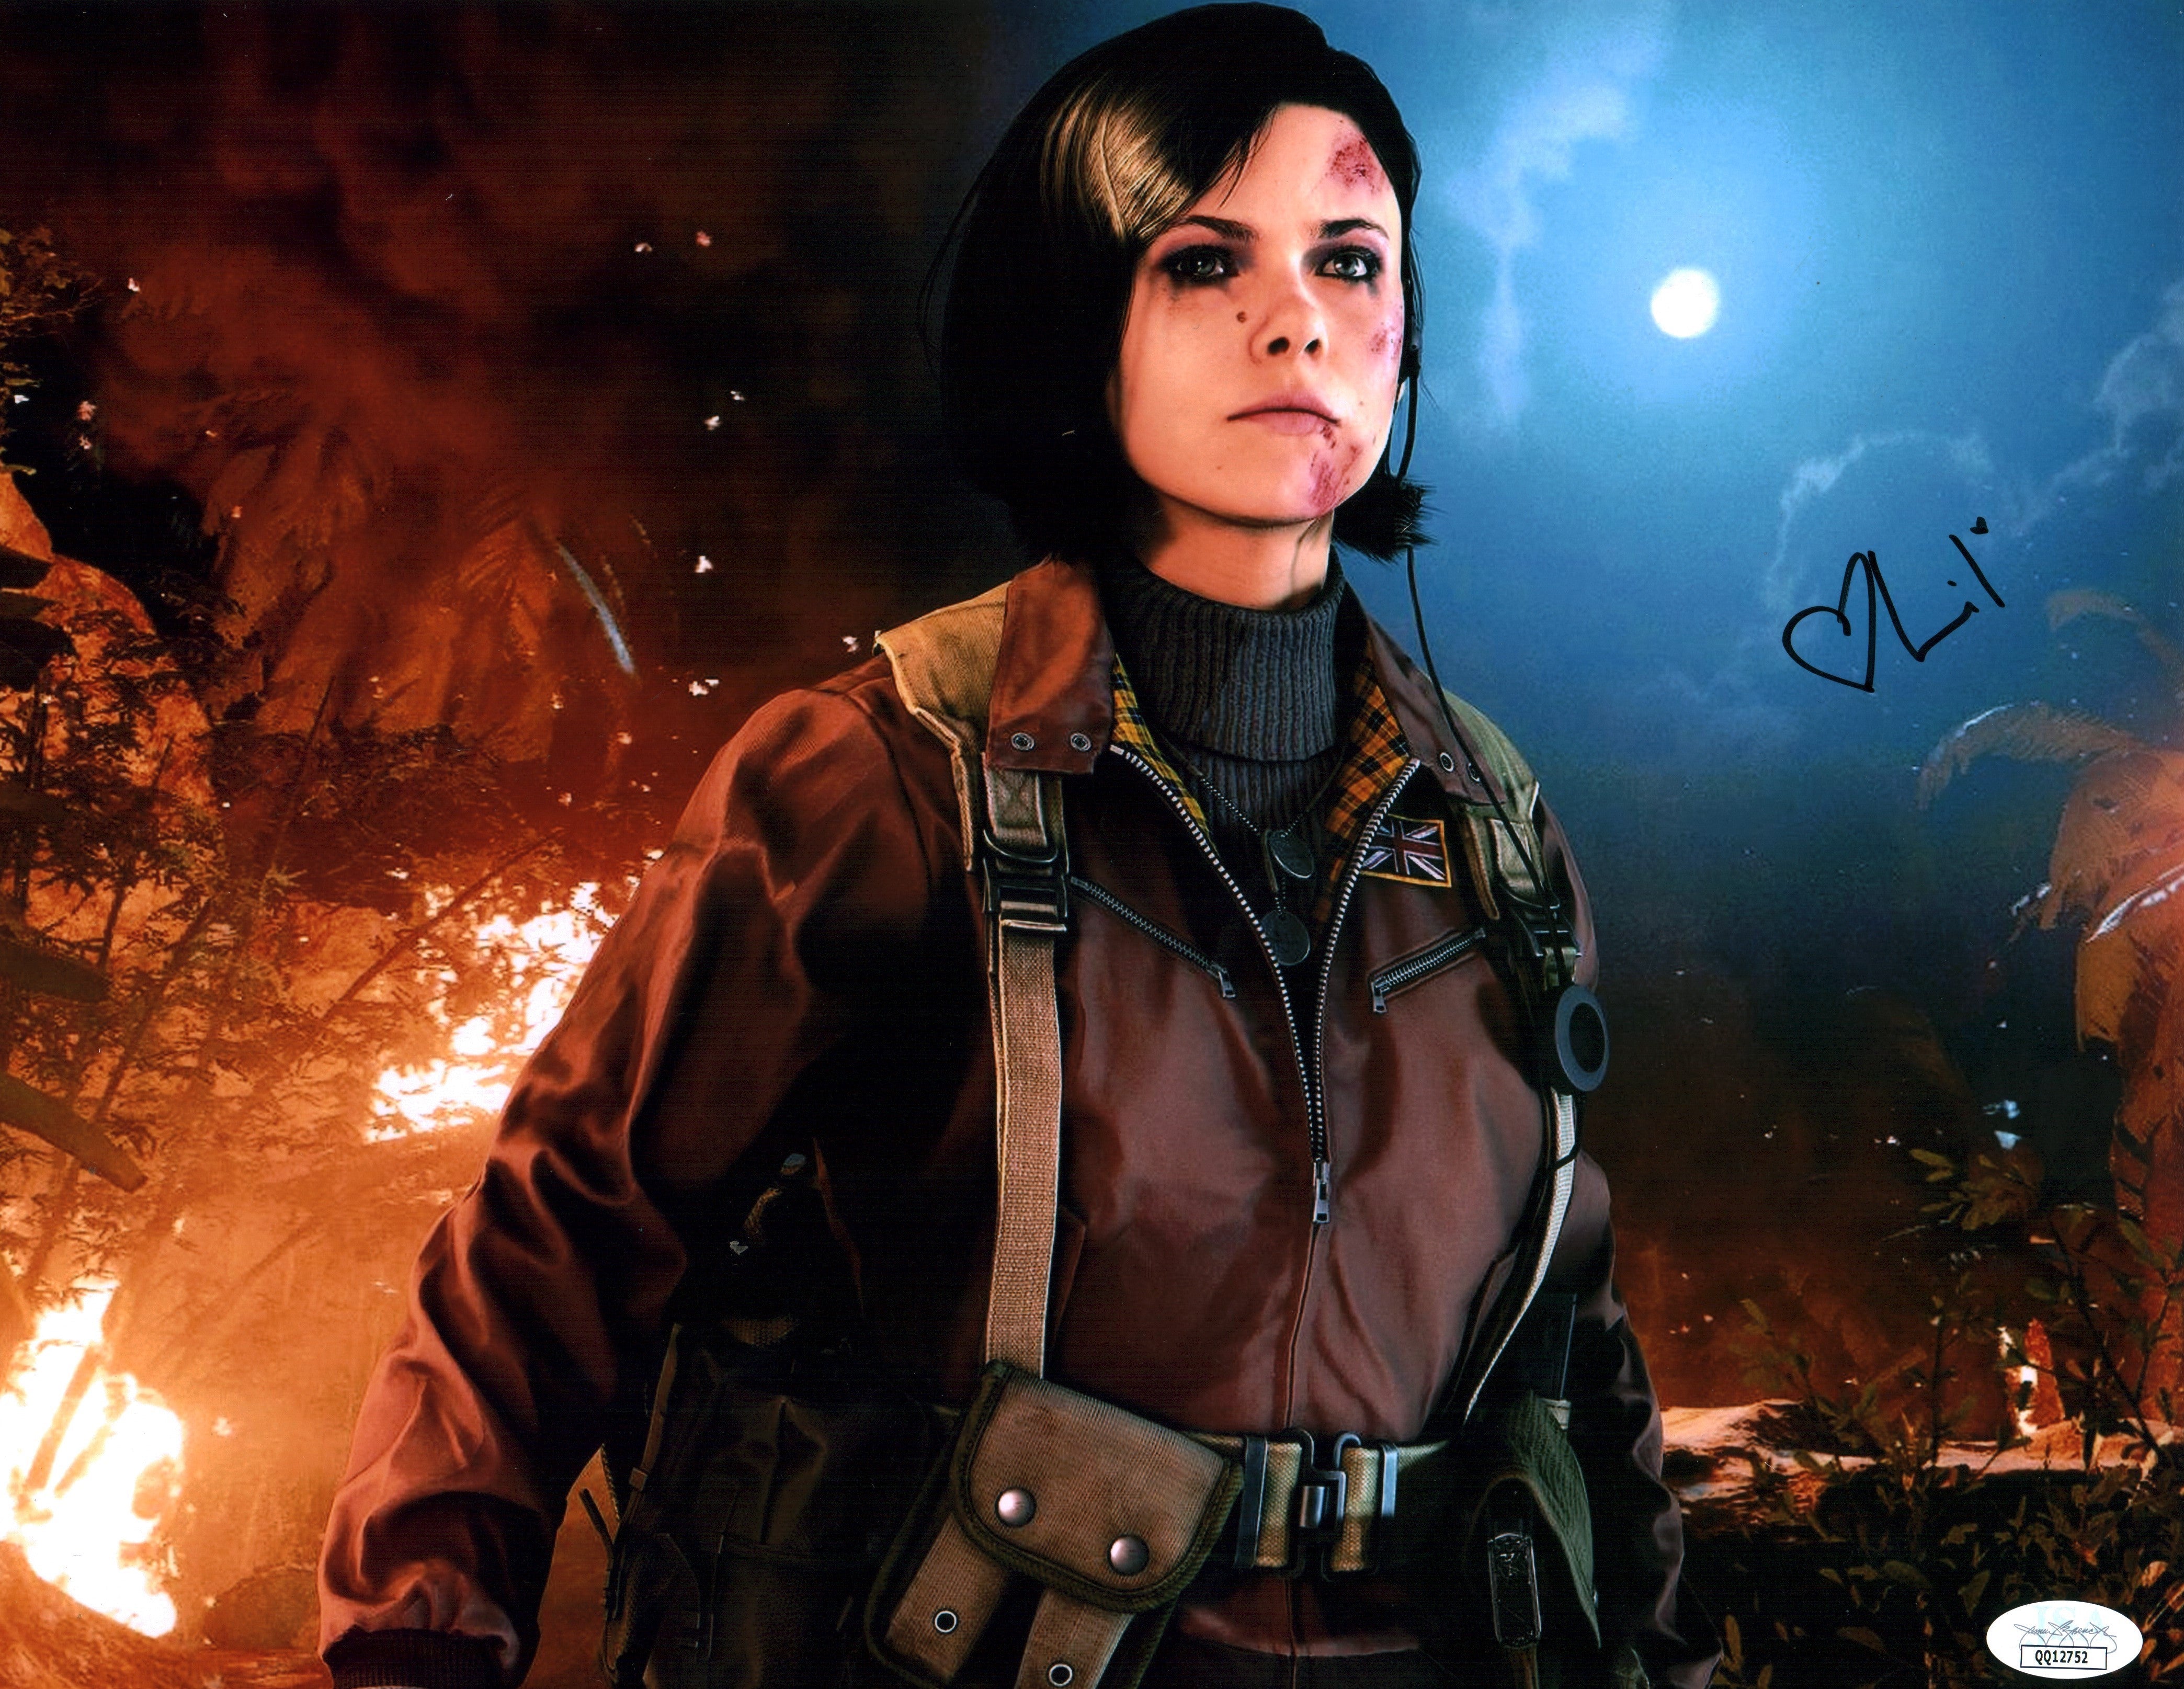 Lily Cowles Call of Duty: Black Ops 11x14 Photo Poster Signed Autographed JSA COA Certified